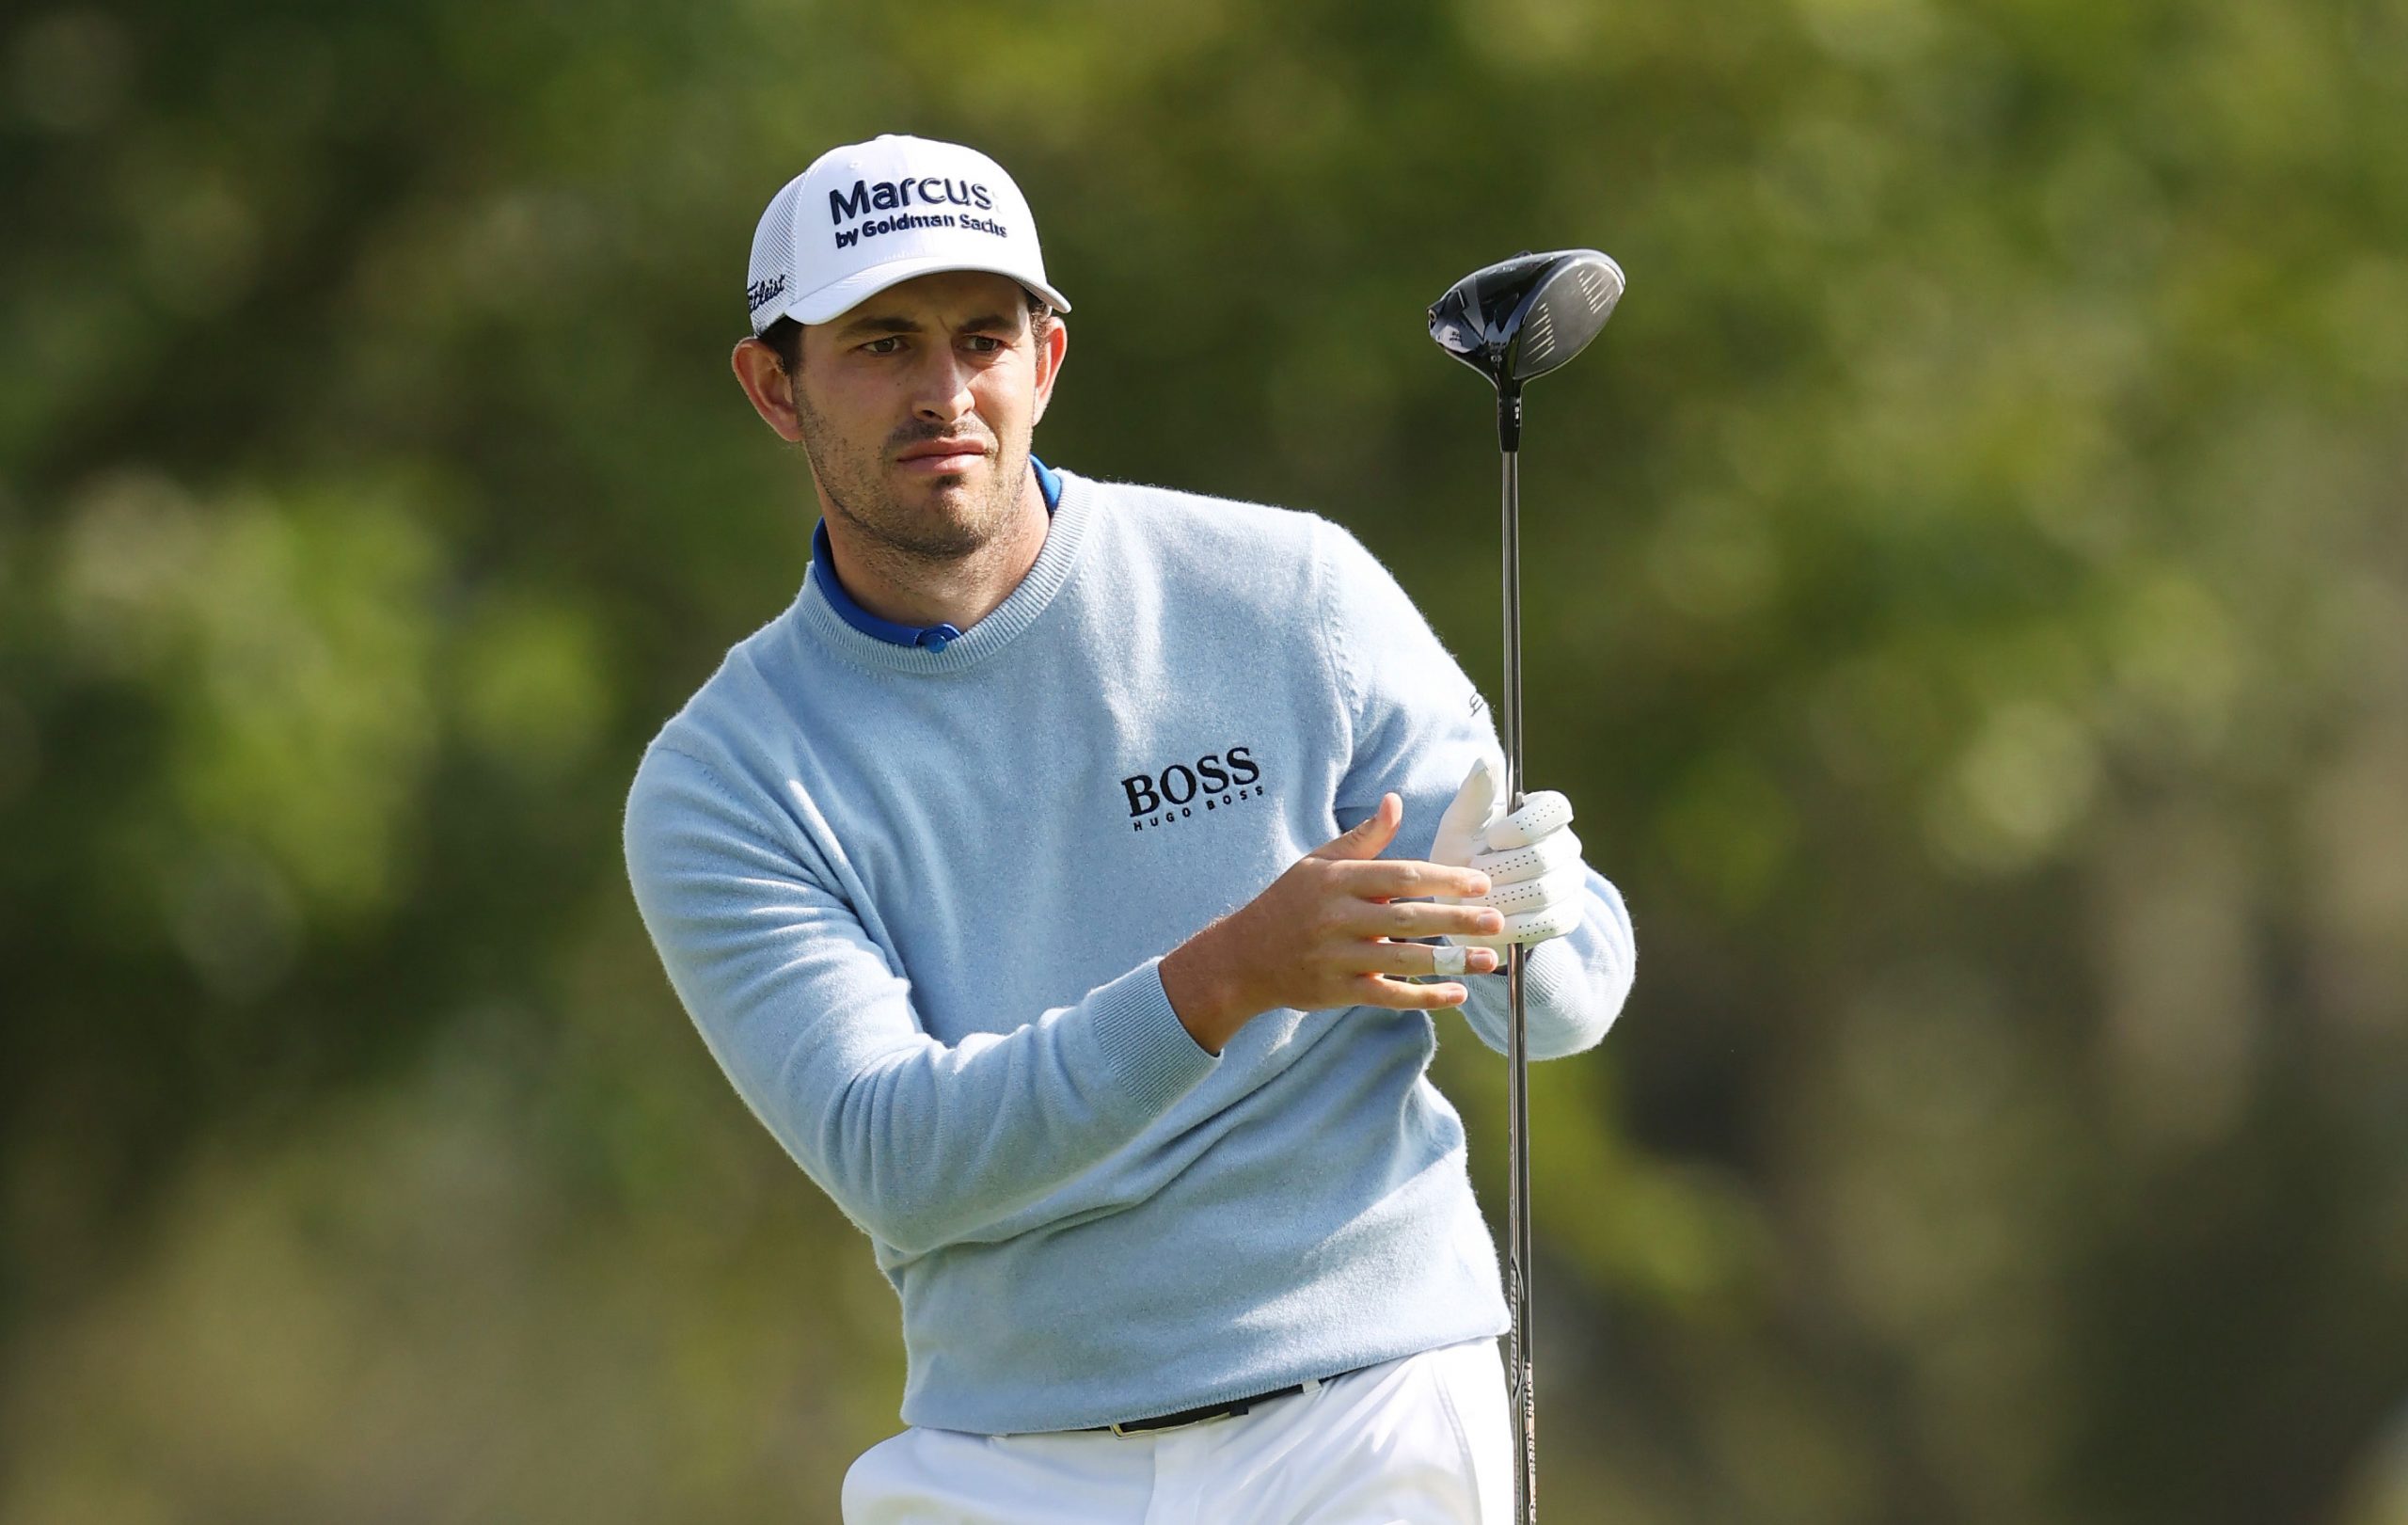 Patrick Cantlay - The Tour Championship